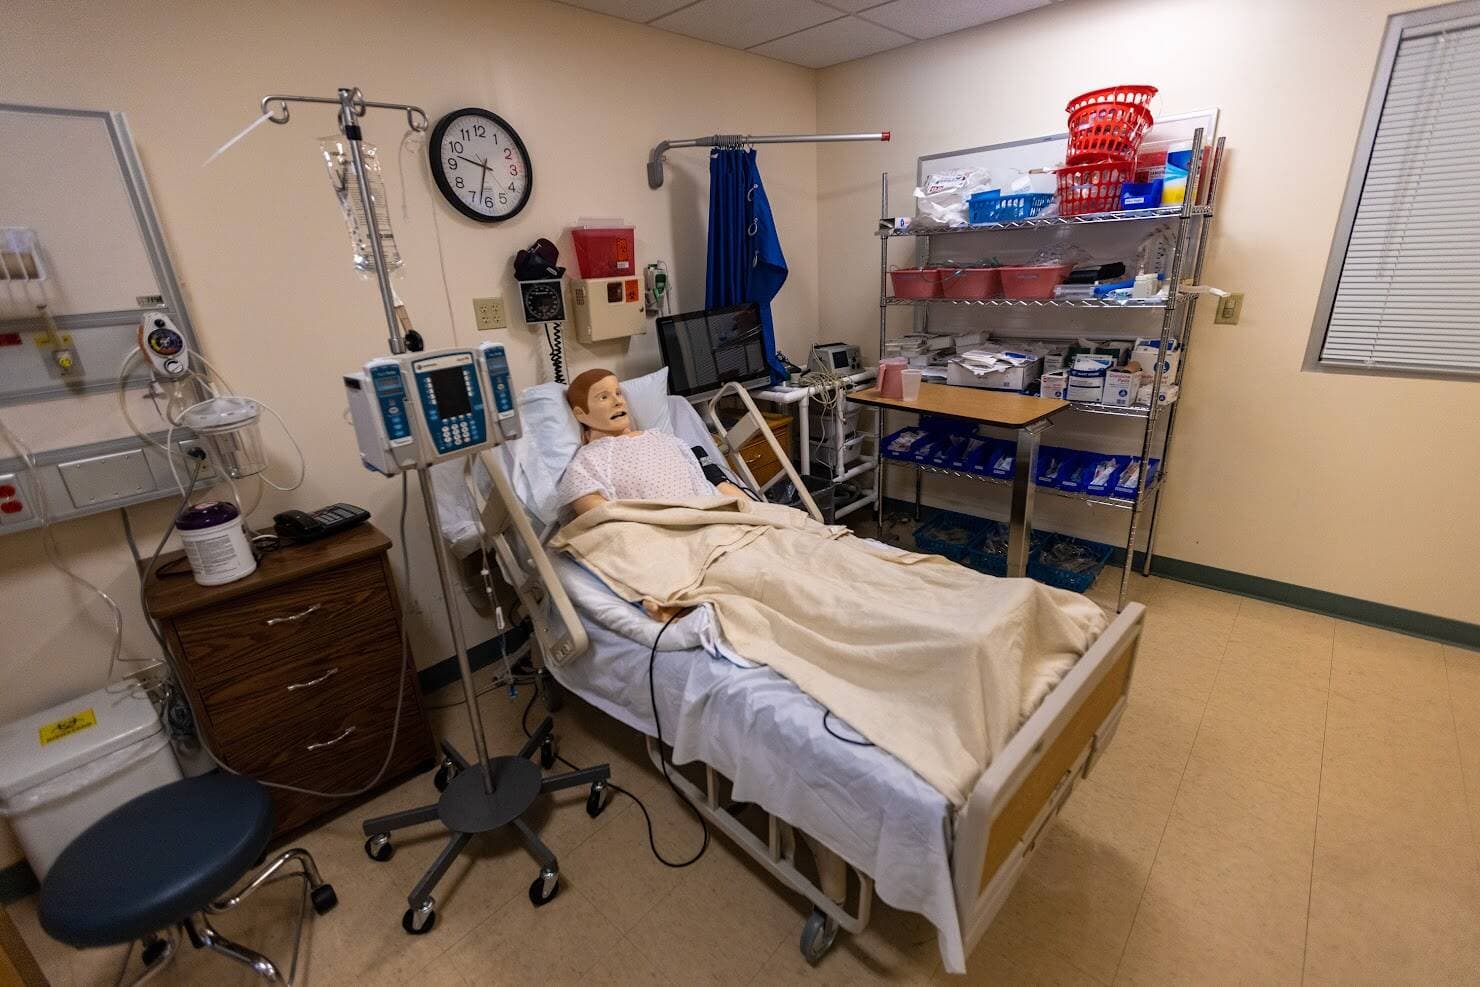 A training dummy lying in a bed in the Nursing Simulation Lab at Bay State College. (Jesse Costa/WBUR)